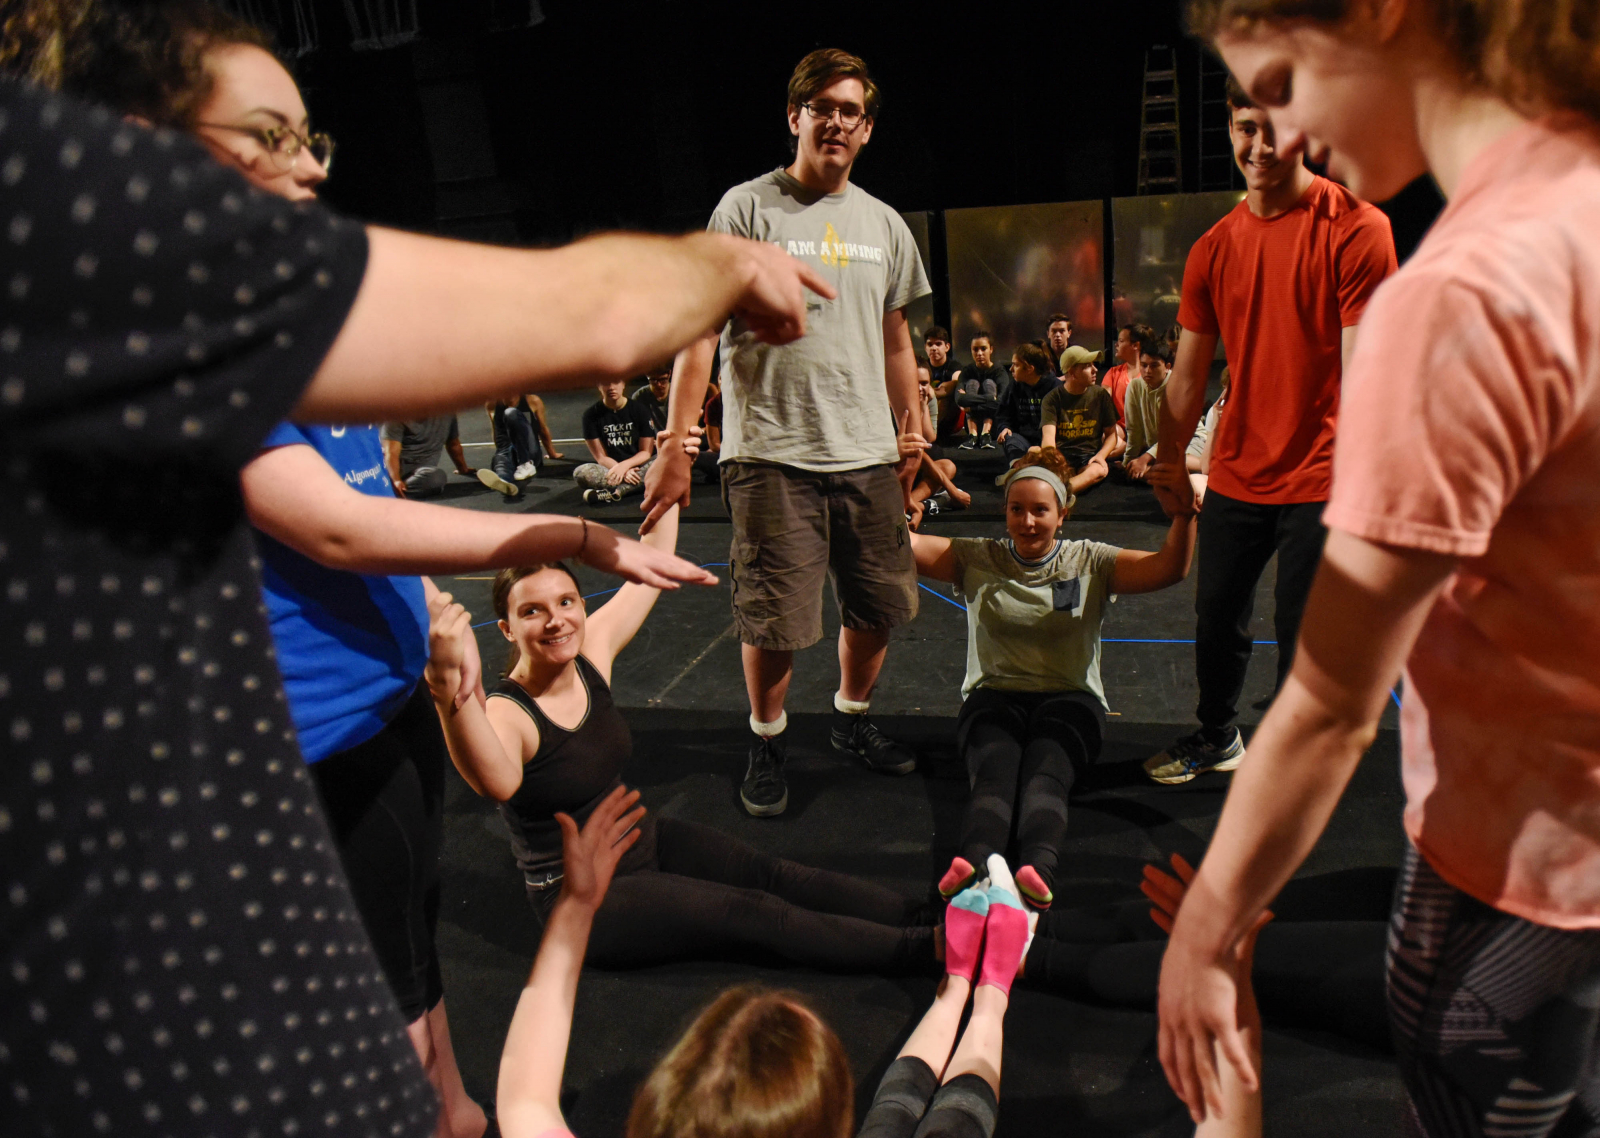 Broadway Camp students learn tumbling and perform partner exercises during their circus workshop at Proctors Thursday, July 13, 2017.